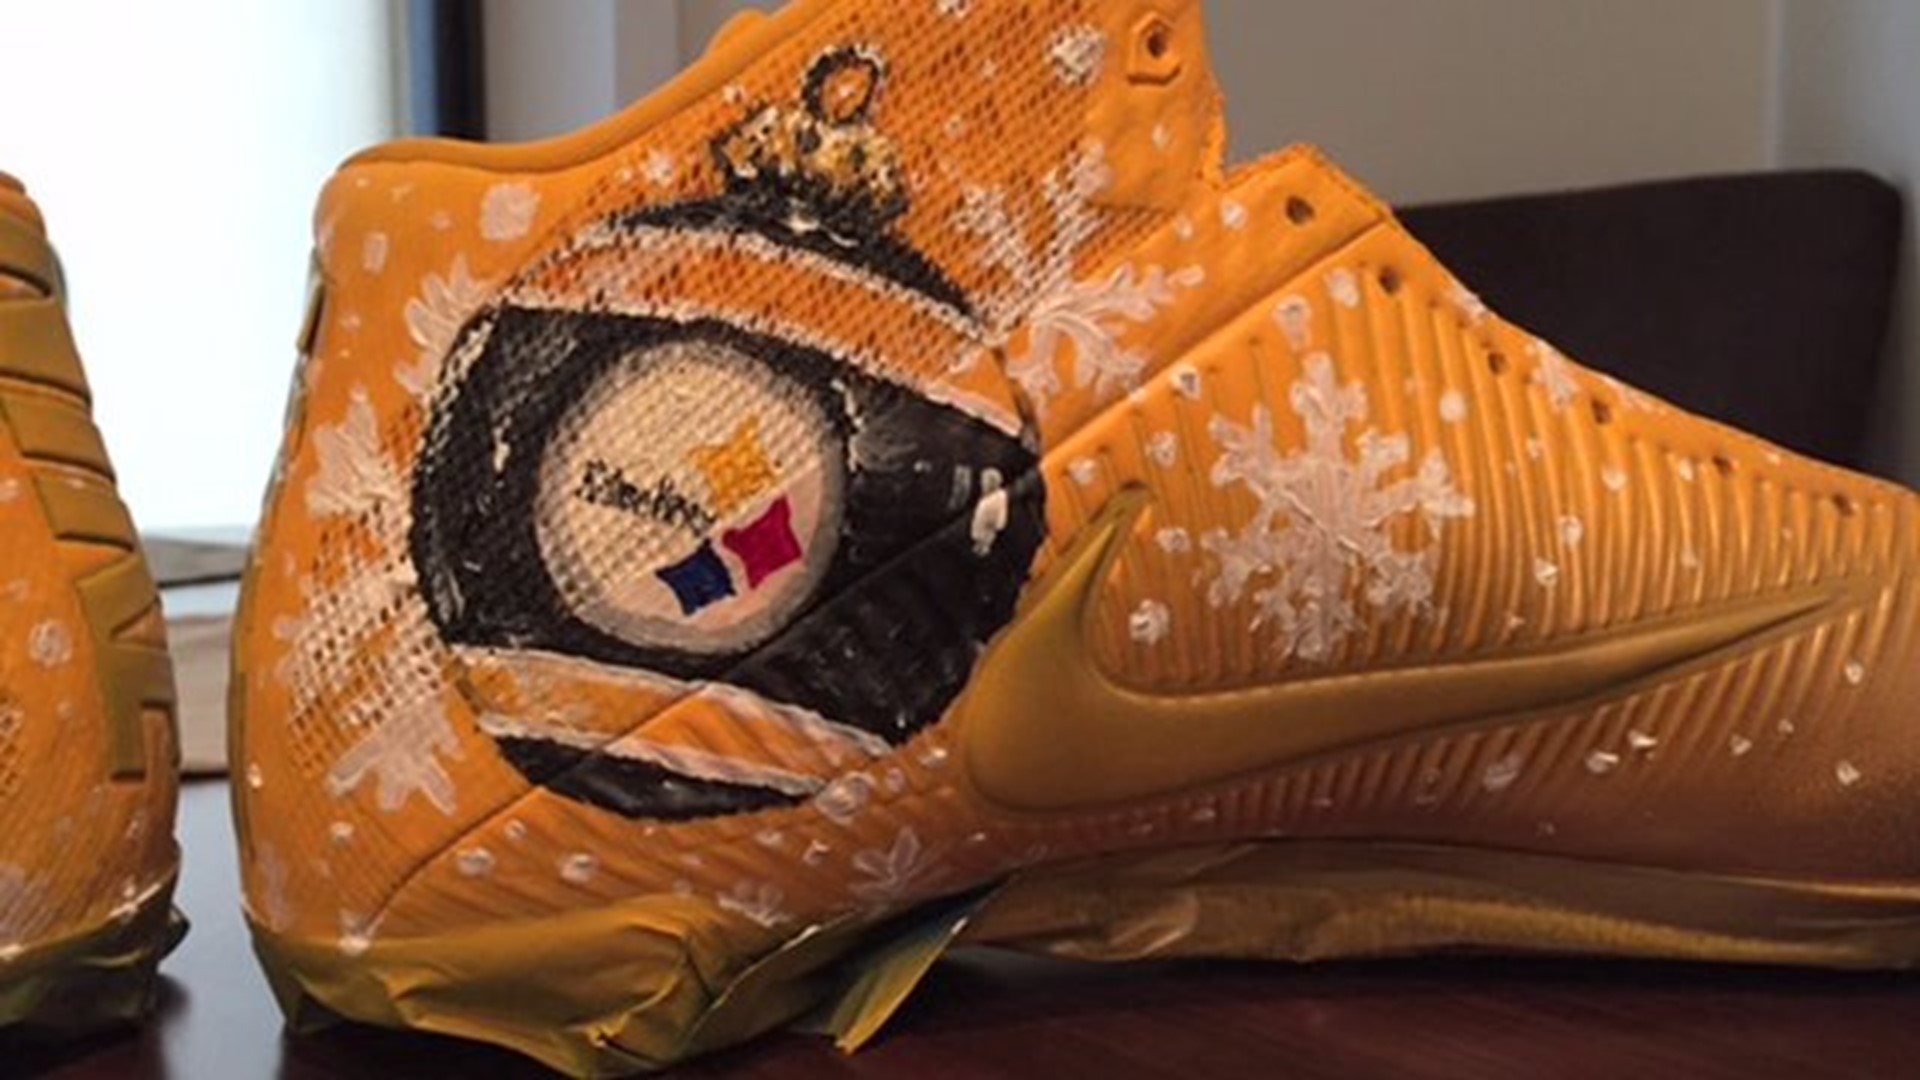 Local man makes customized cleats for NFL